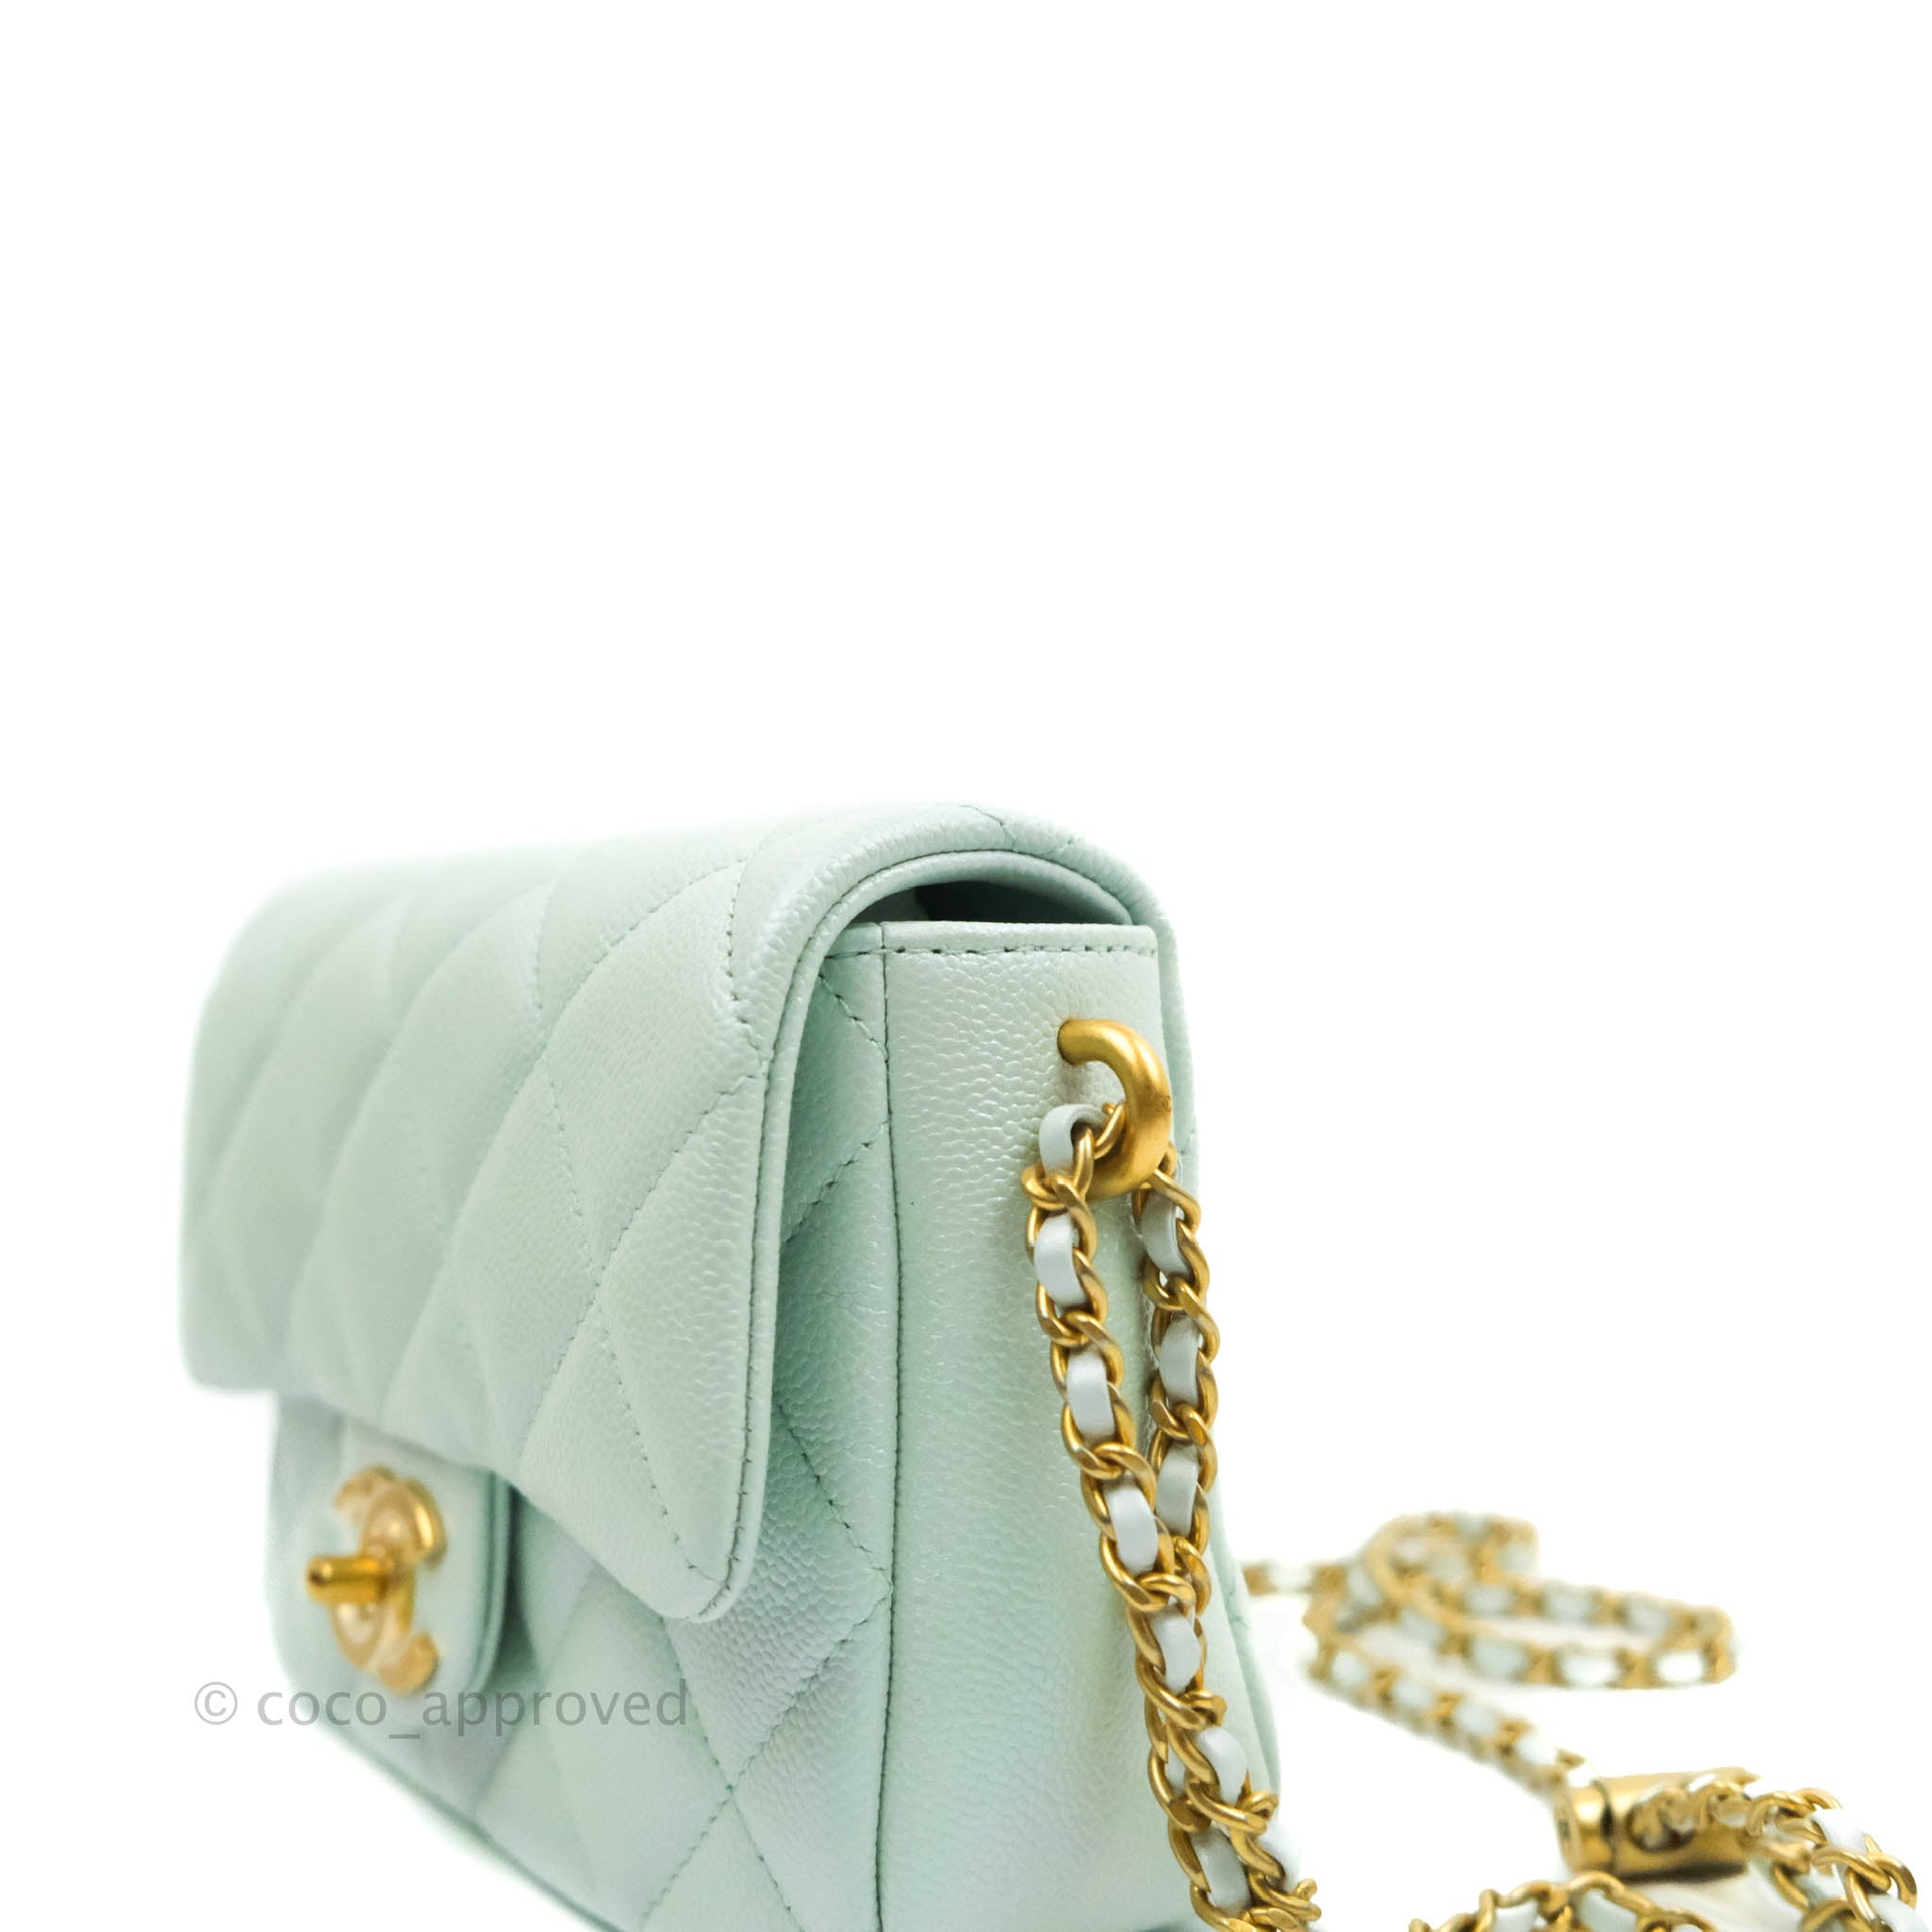 CHANEL Iridescent Caviar Quilted Mini My Perfect Flap Light Green 891856